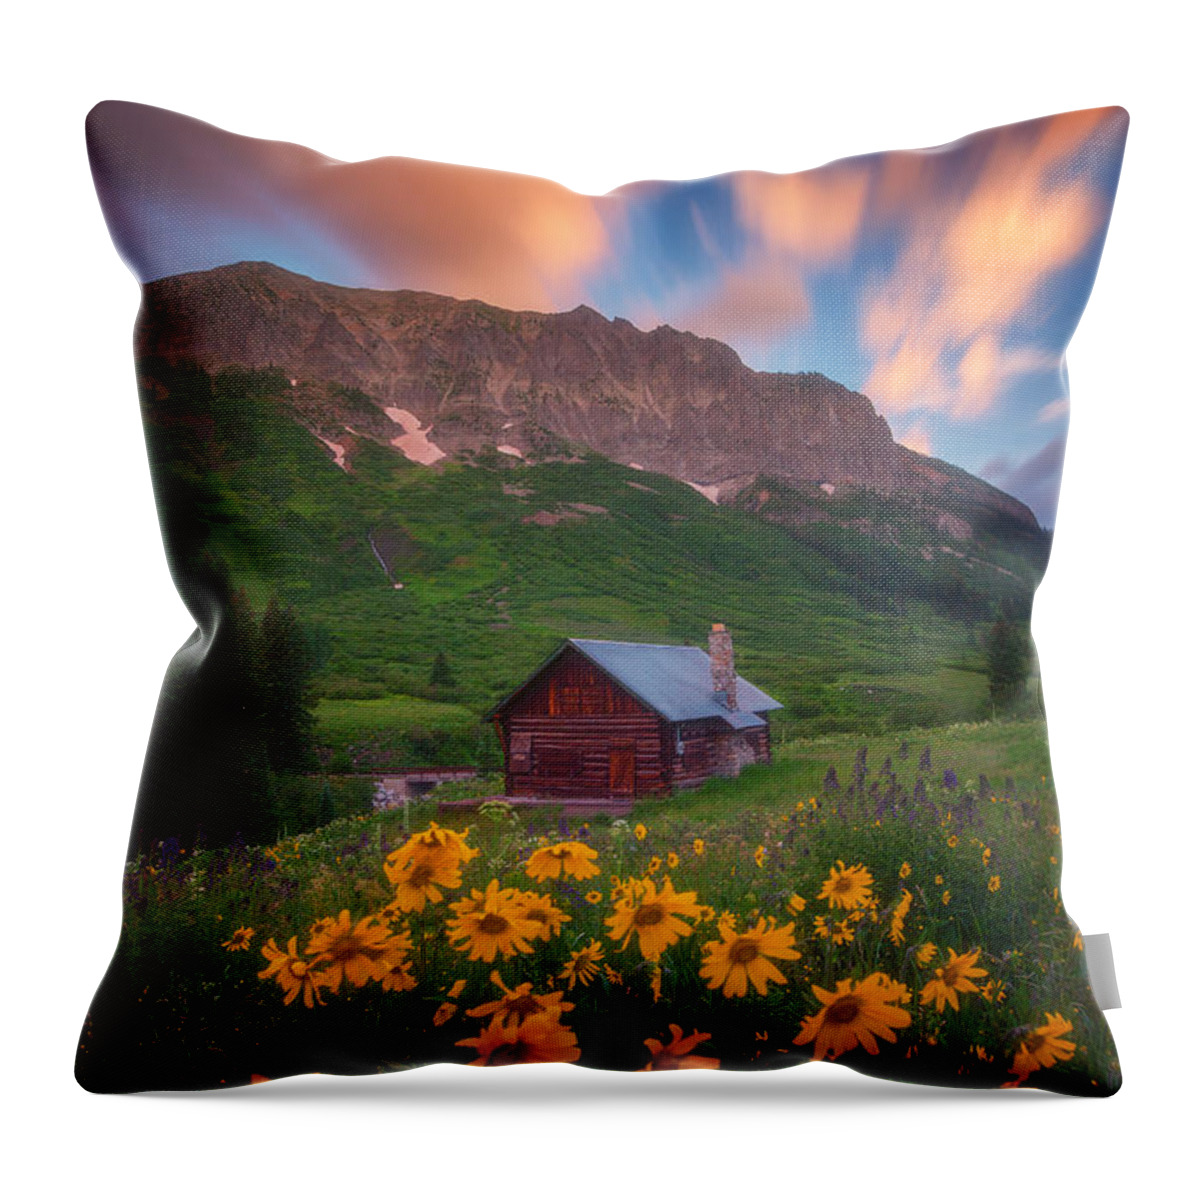 Sunrise Throw Pillow featuring the photograph Sunrise Cabin by Darren White